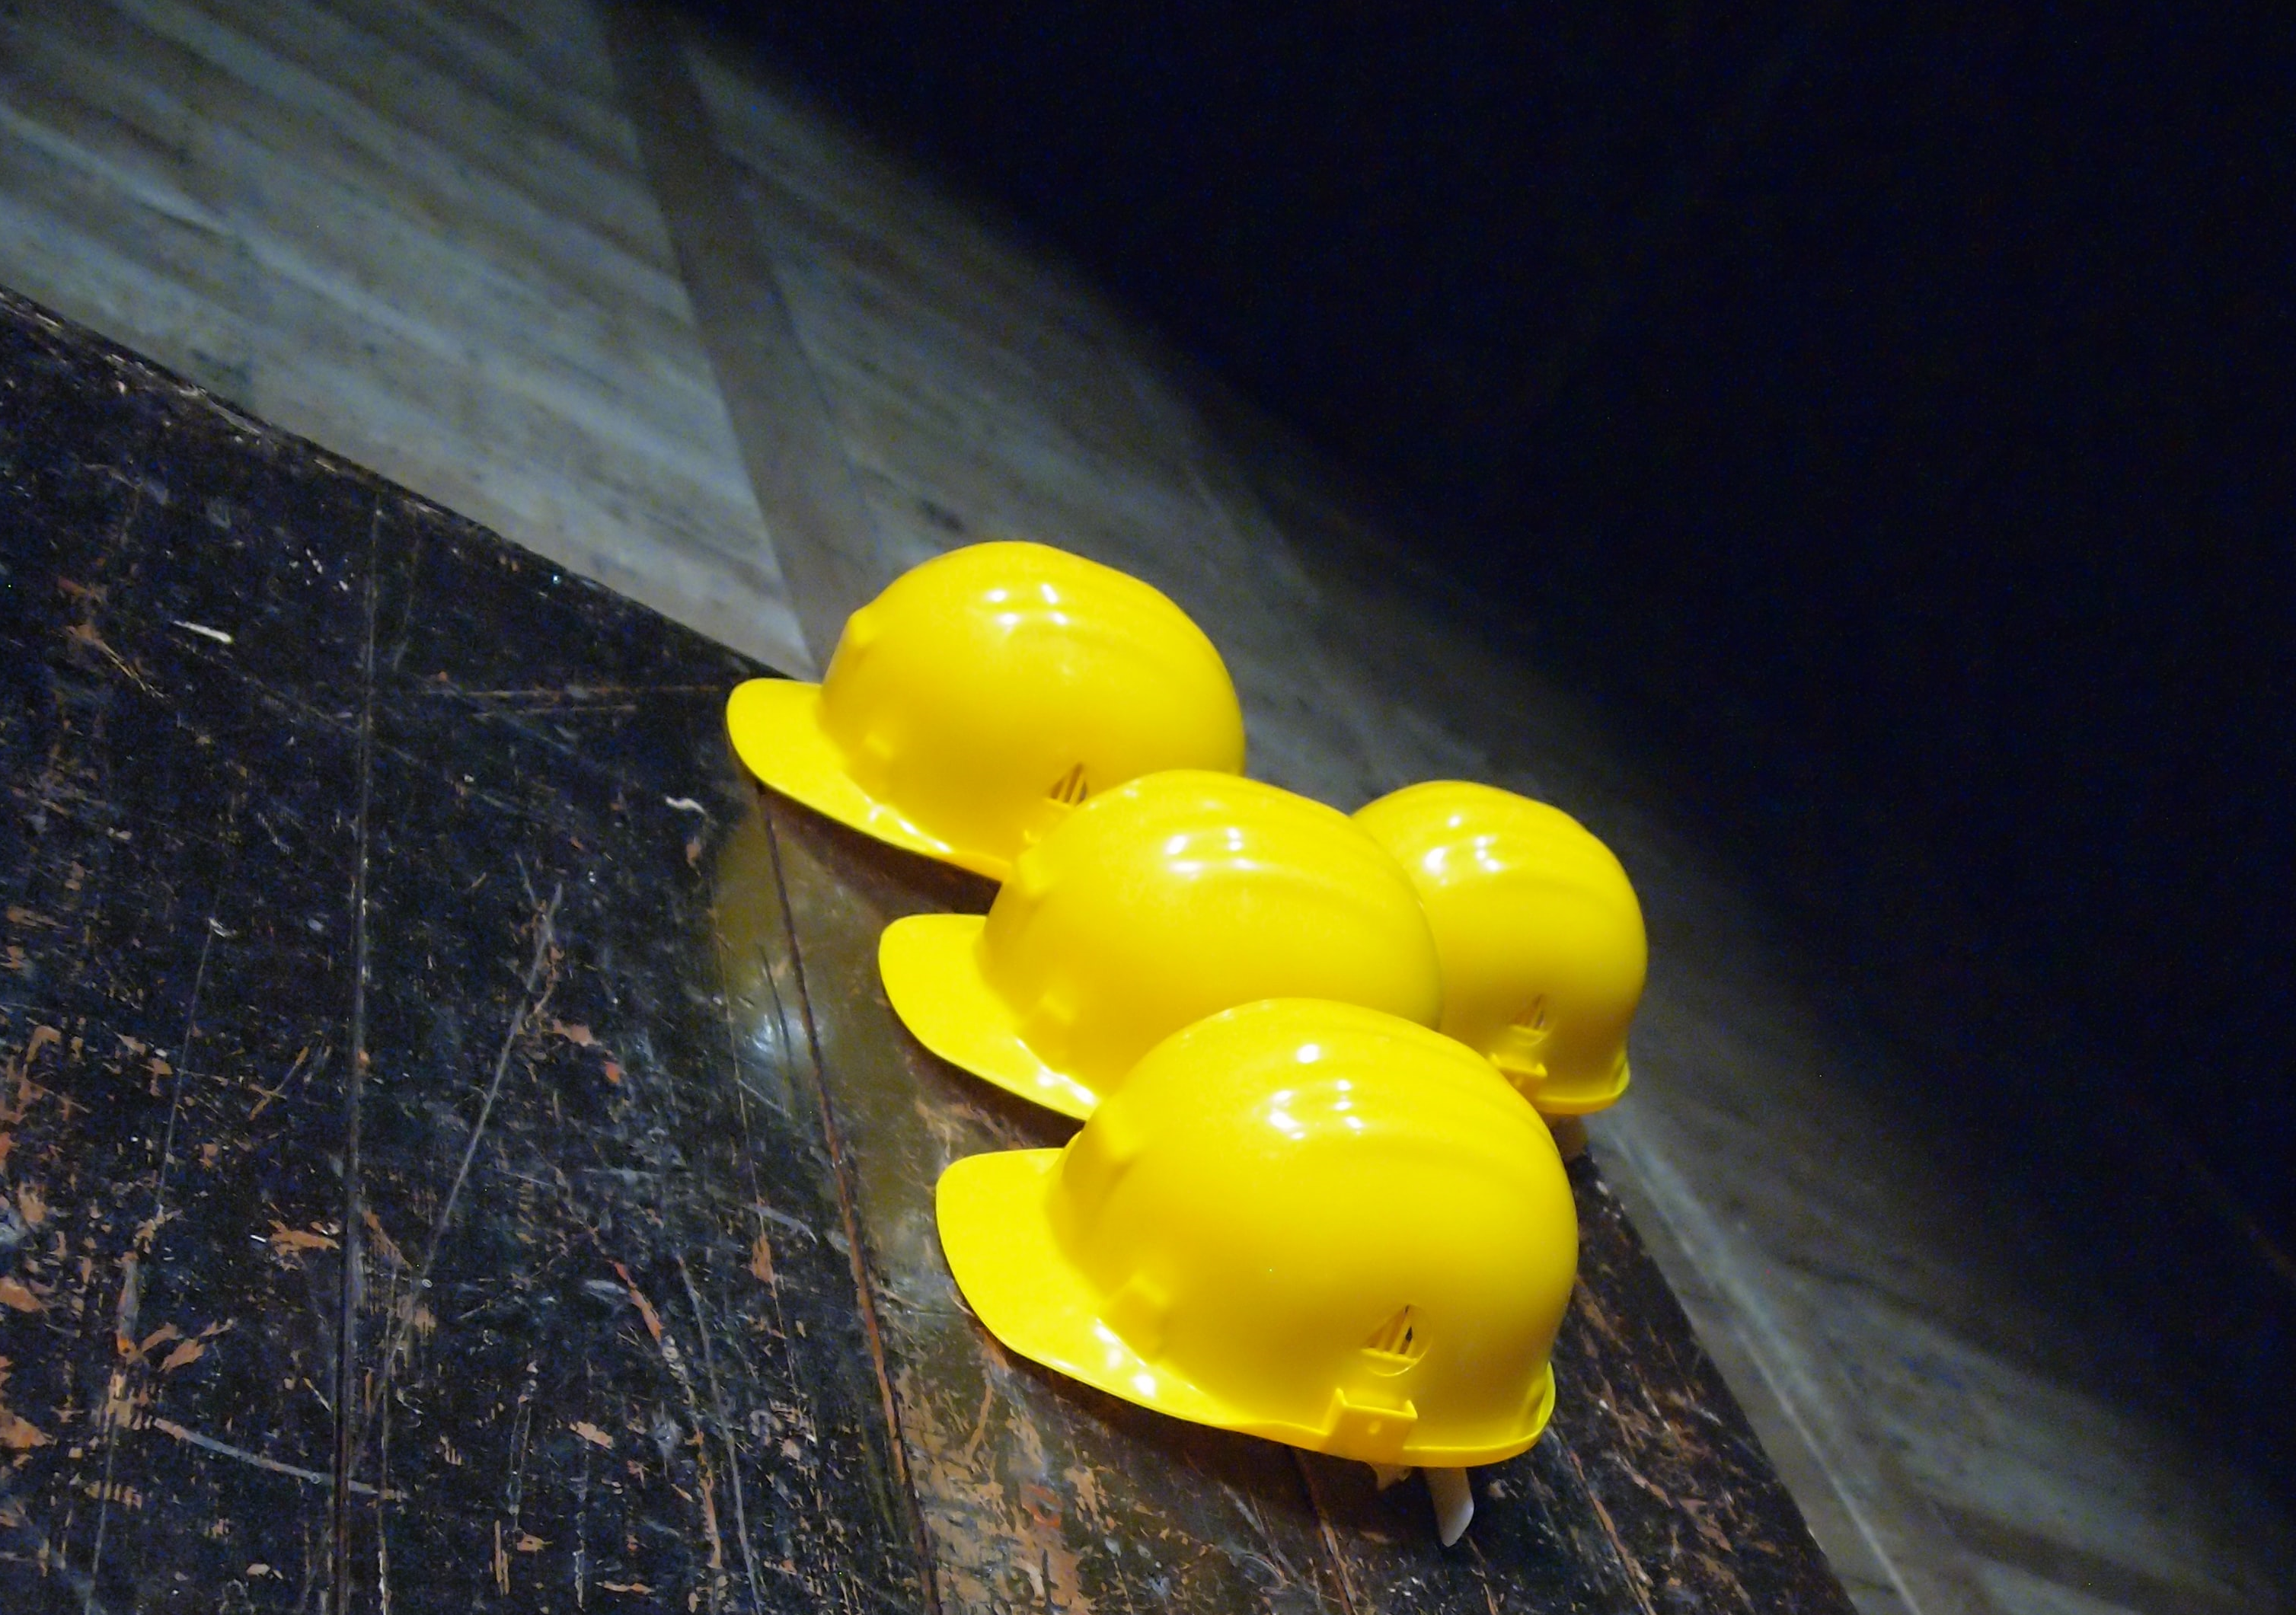 A bunch of toy yellow hard hats are grouped together overtop dark flooring.